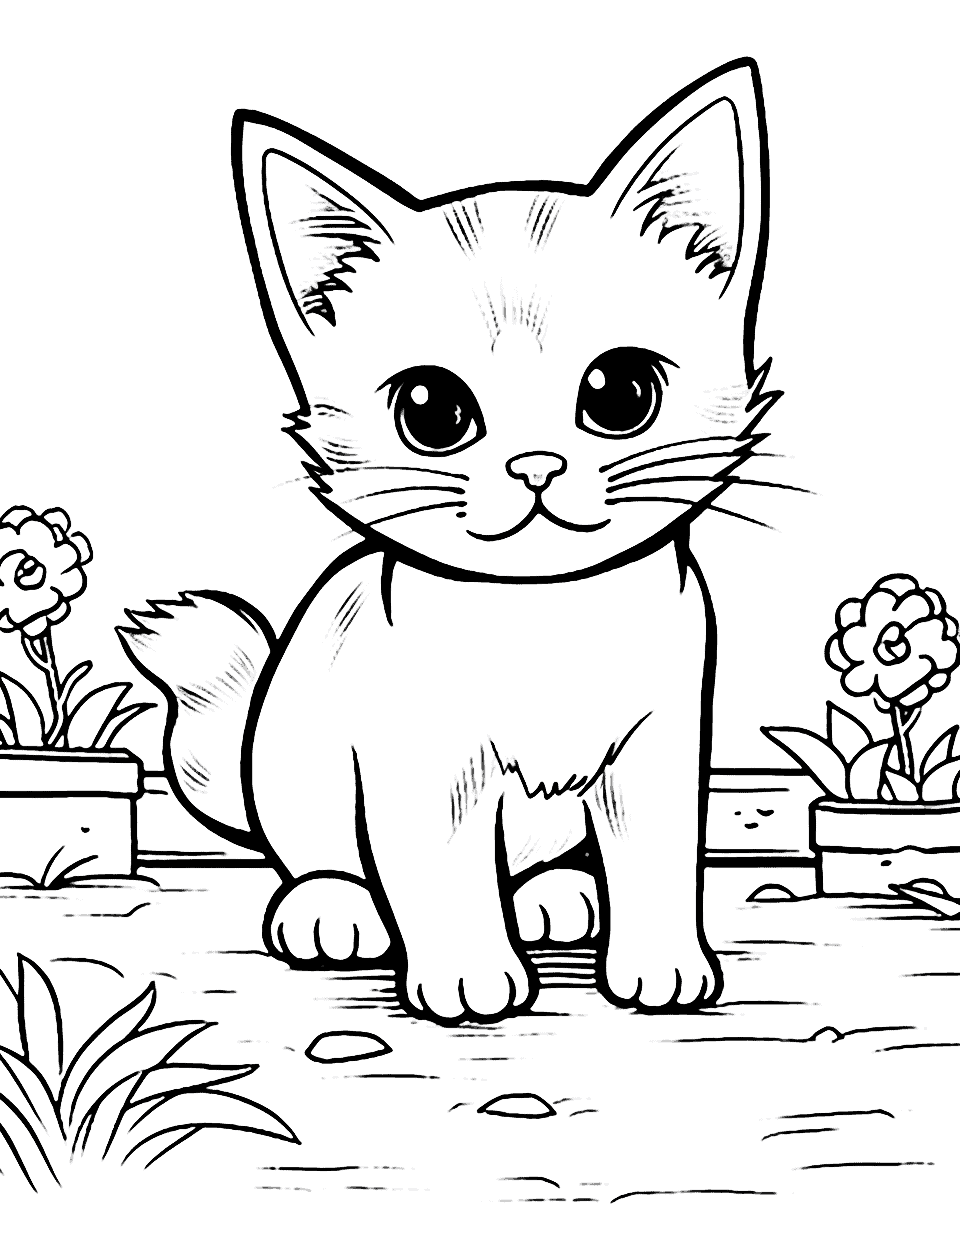 Baby Cat Exploring the Yard Coloring Page - A baby cat stepping out into the yard for the first time with a look of excitement.